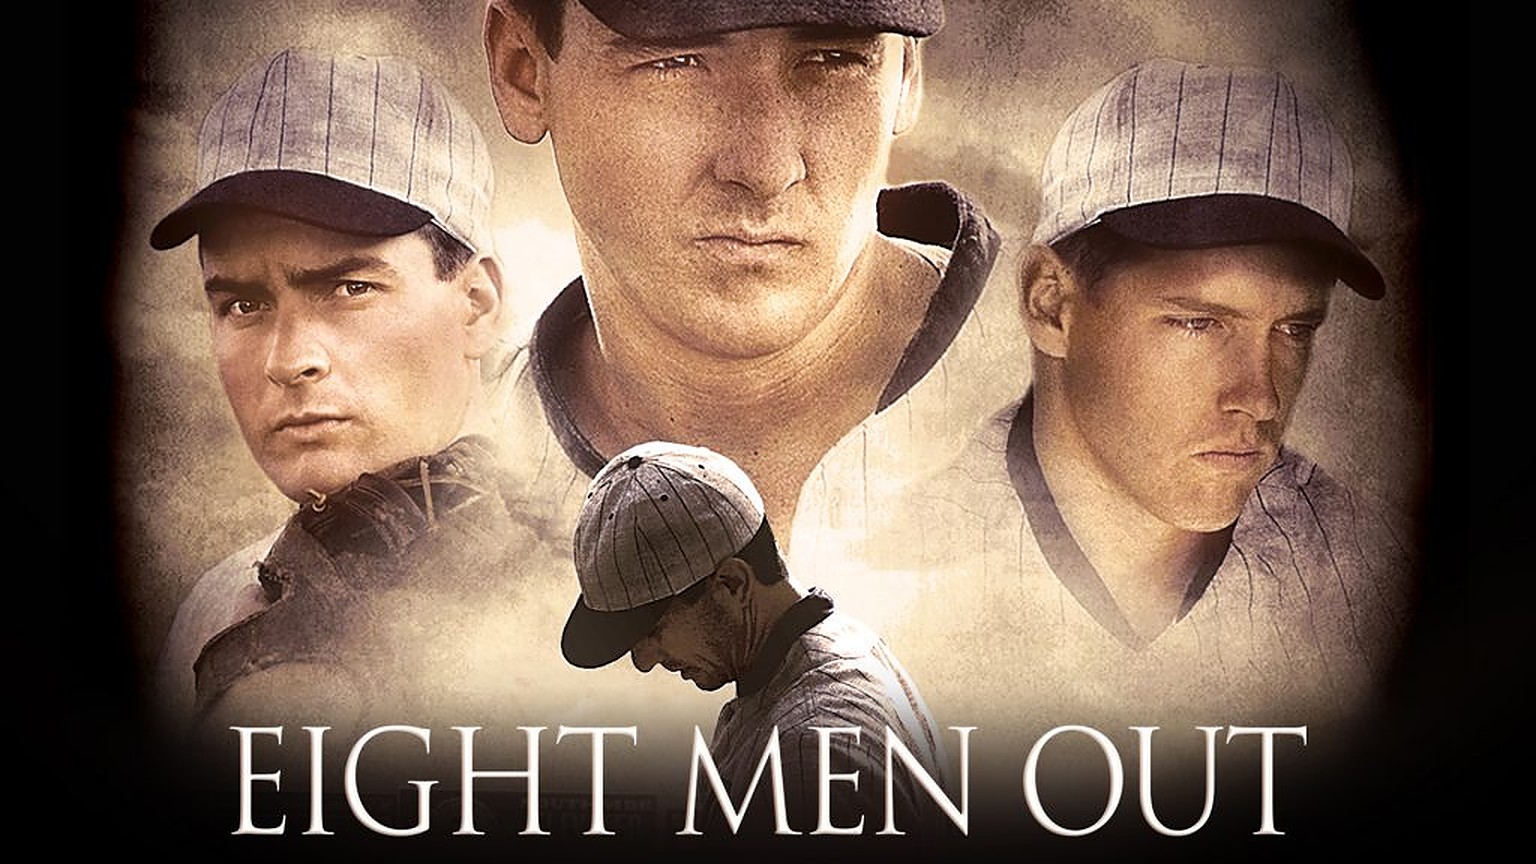 41-facts-about-the-movie-eight-men-out